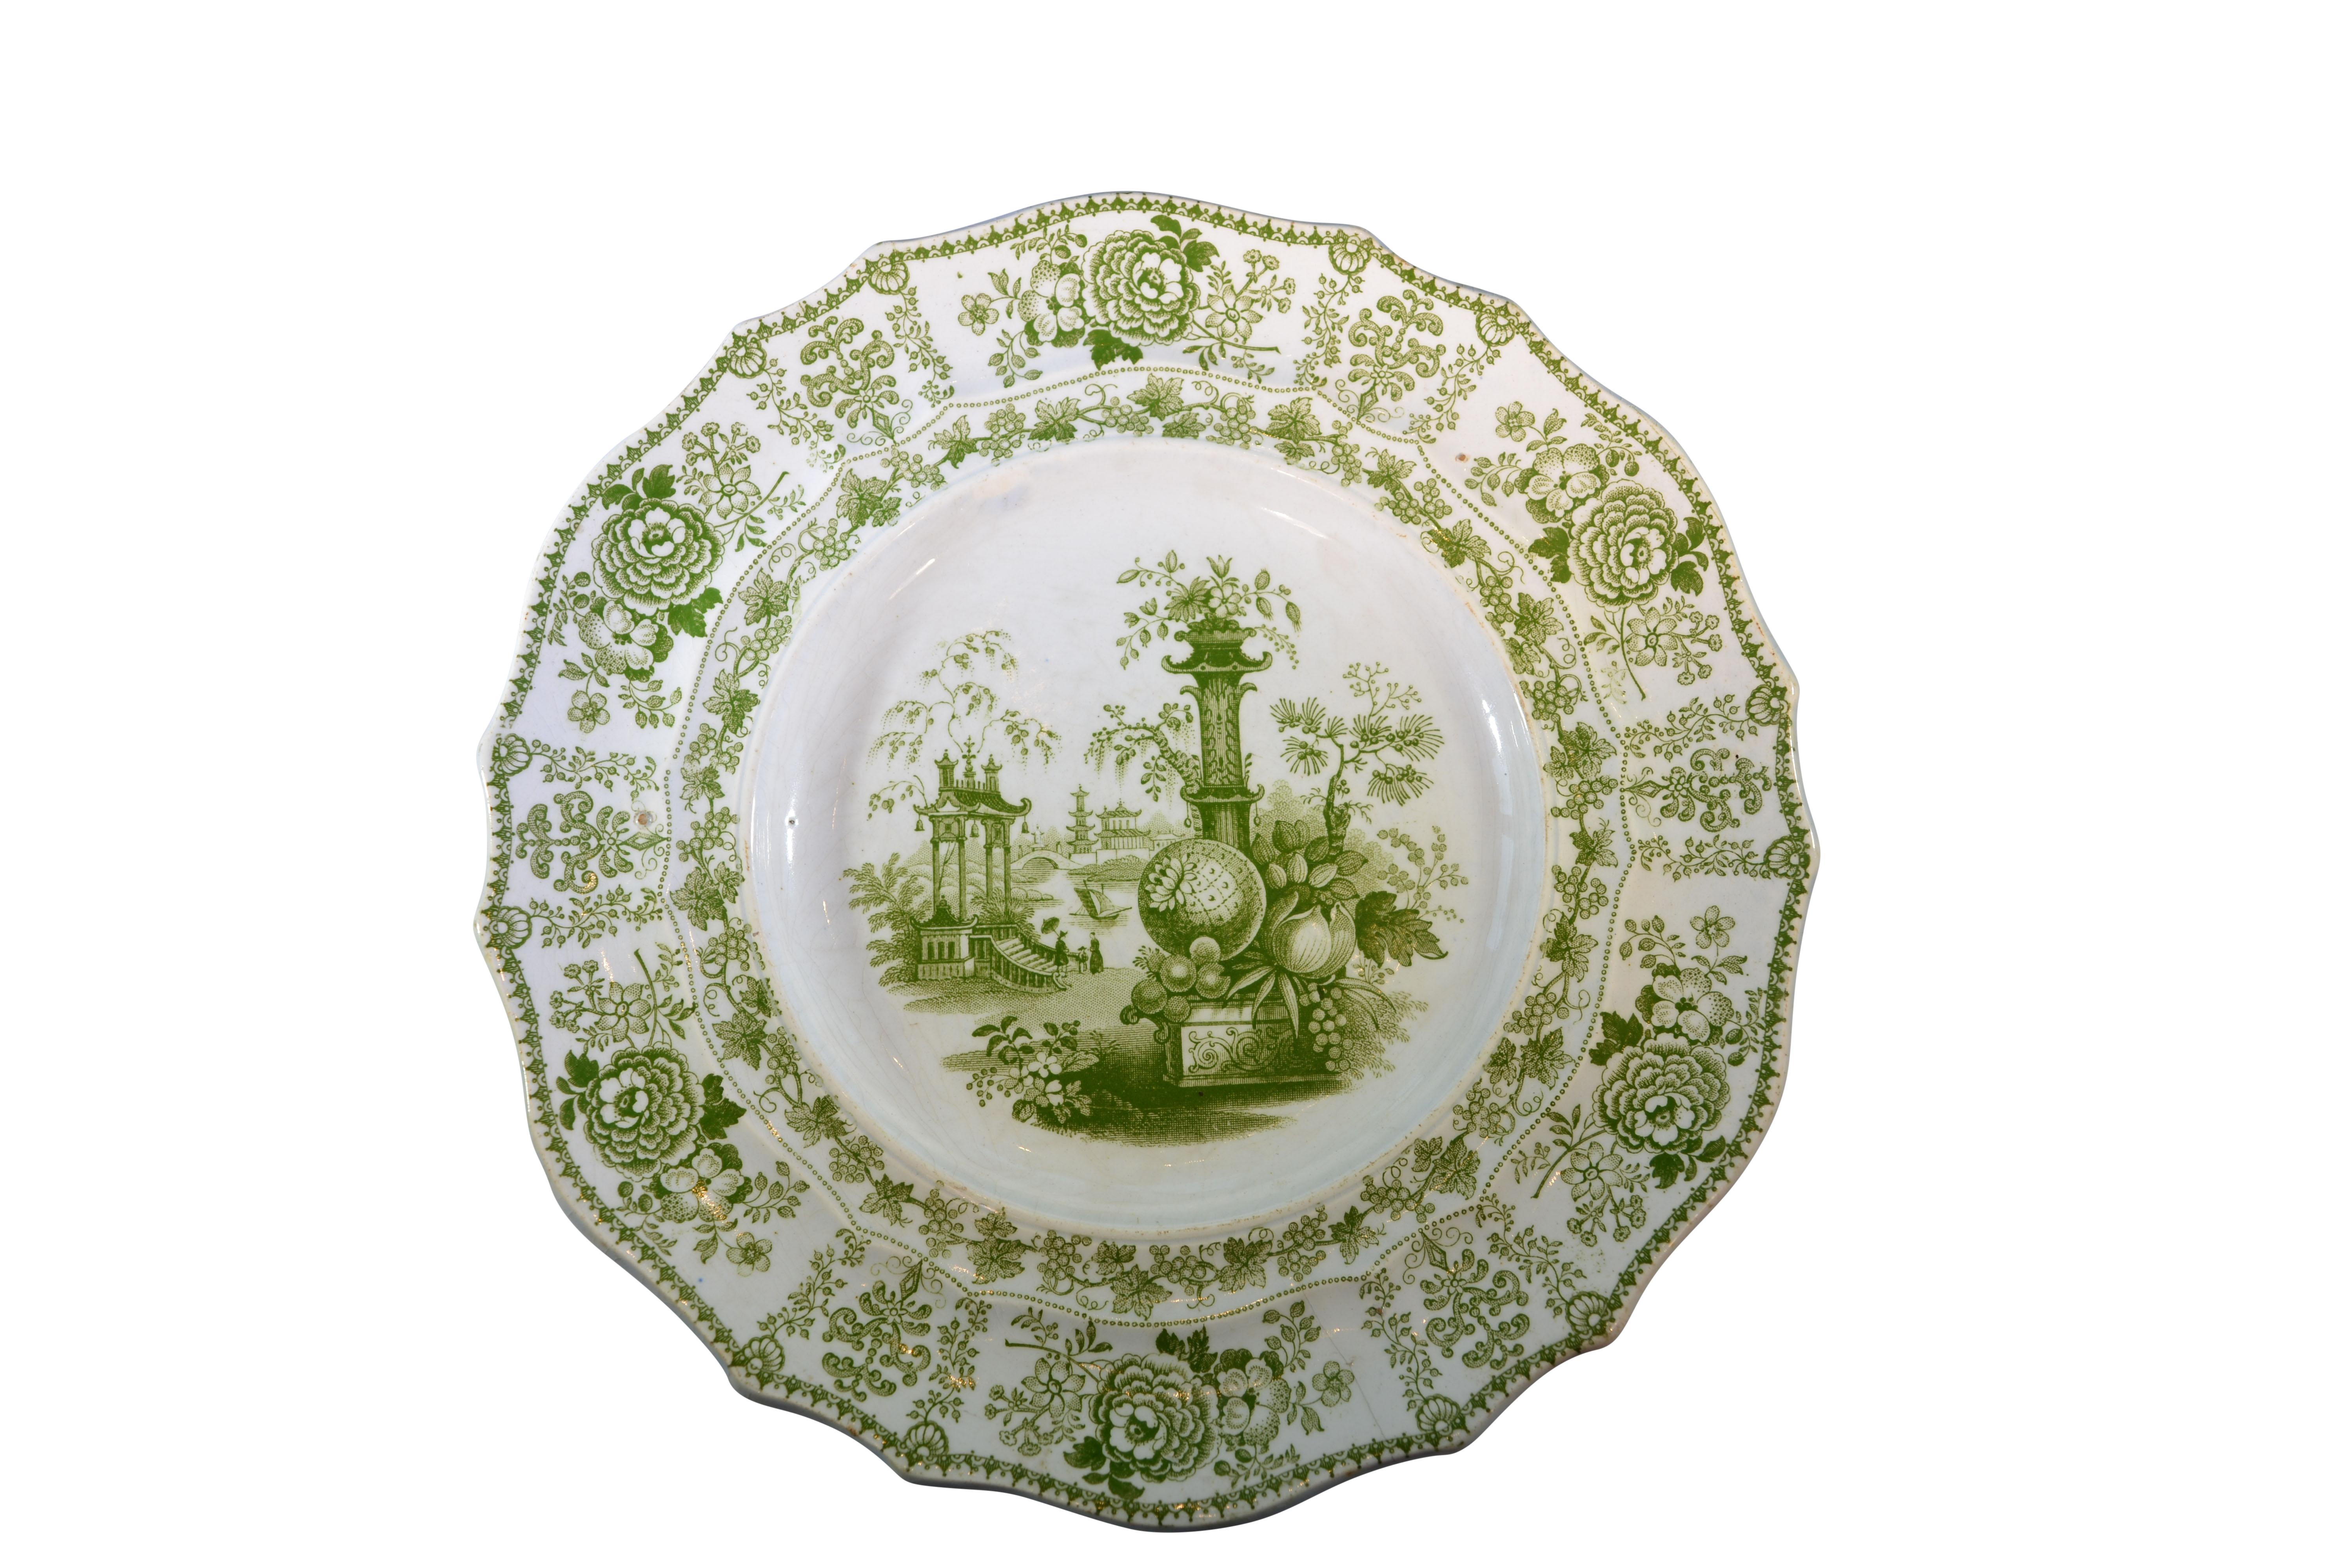 Lovely pair of coordinating green transferware plates. The Davenport mark appears to be first used in 1842.